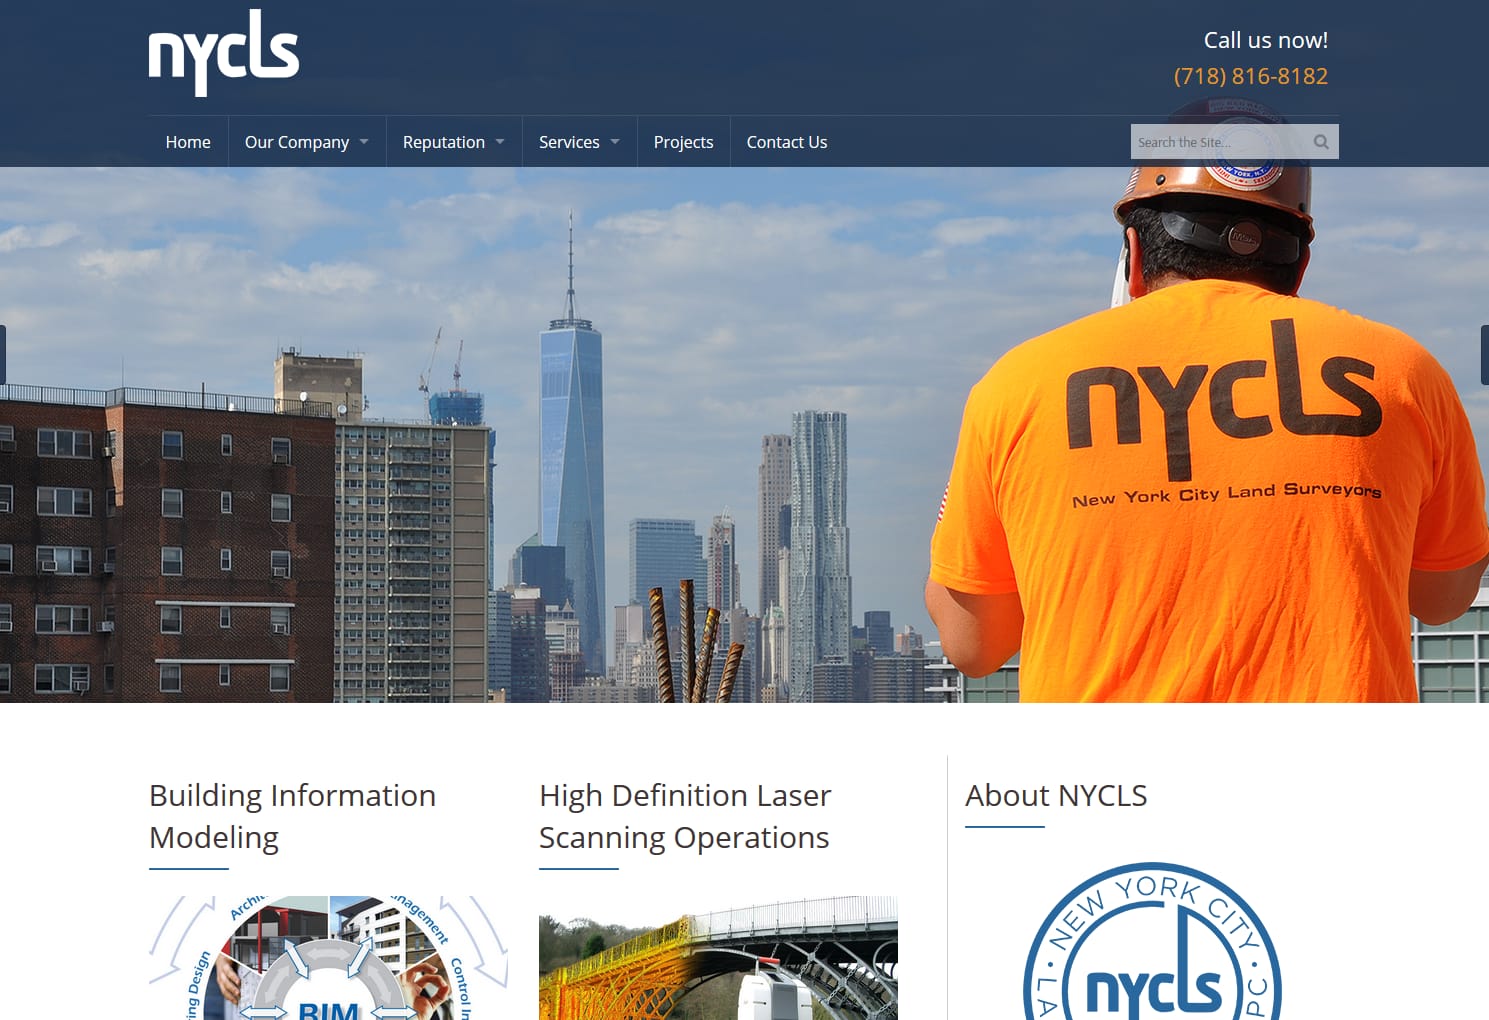 For this project, NBT provided <strong>NYC Land Surveyors</strong> with a fully responsive web design, featuring engaging animated home page sections and comprehensive copy-editing to ensure clarity and professionalism in their web content. The design's focus on user engagement is evident through the dynamic animations that guide visitors intuitively through the various surveying services offered. This approach underscores the firm's commitment to modern surveying techniques and precision.</p>
<p>Meticulous attention to detail was also given to the website’s content. Through thorough copy-editing, the site's text was refined to effectively communicate the firm's expertise and range of services. This meticulous approach enhanced the overall credibility and professionalism of the website, making it a reliable resource for both commercial and residential surveying information in New York City.</p>
<p>The aesthetic appeal and functionality of the site were paramount in this project. The responsive design ensures a seamless user experience across various devices, reflecting the firm's contemporary approach to land surveying. This strategy was aimed at attracting a diverse client base in the bustling metropolis of New York City, establishing NYC Land Surveyors as a leader in their field.<br />
